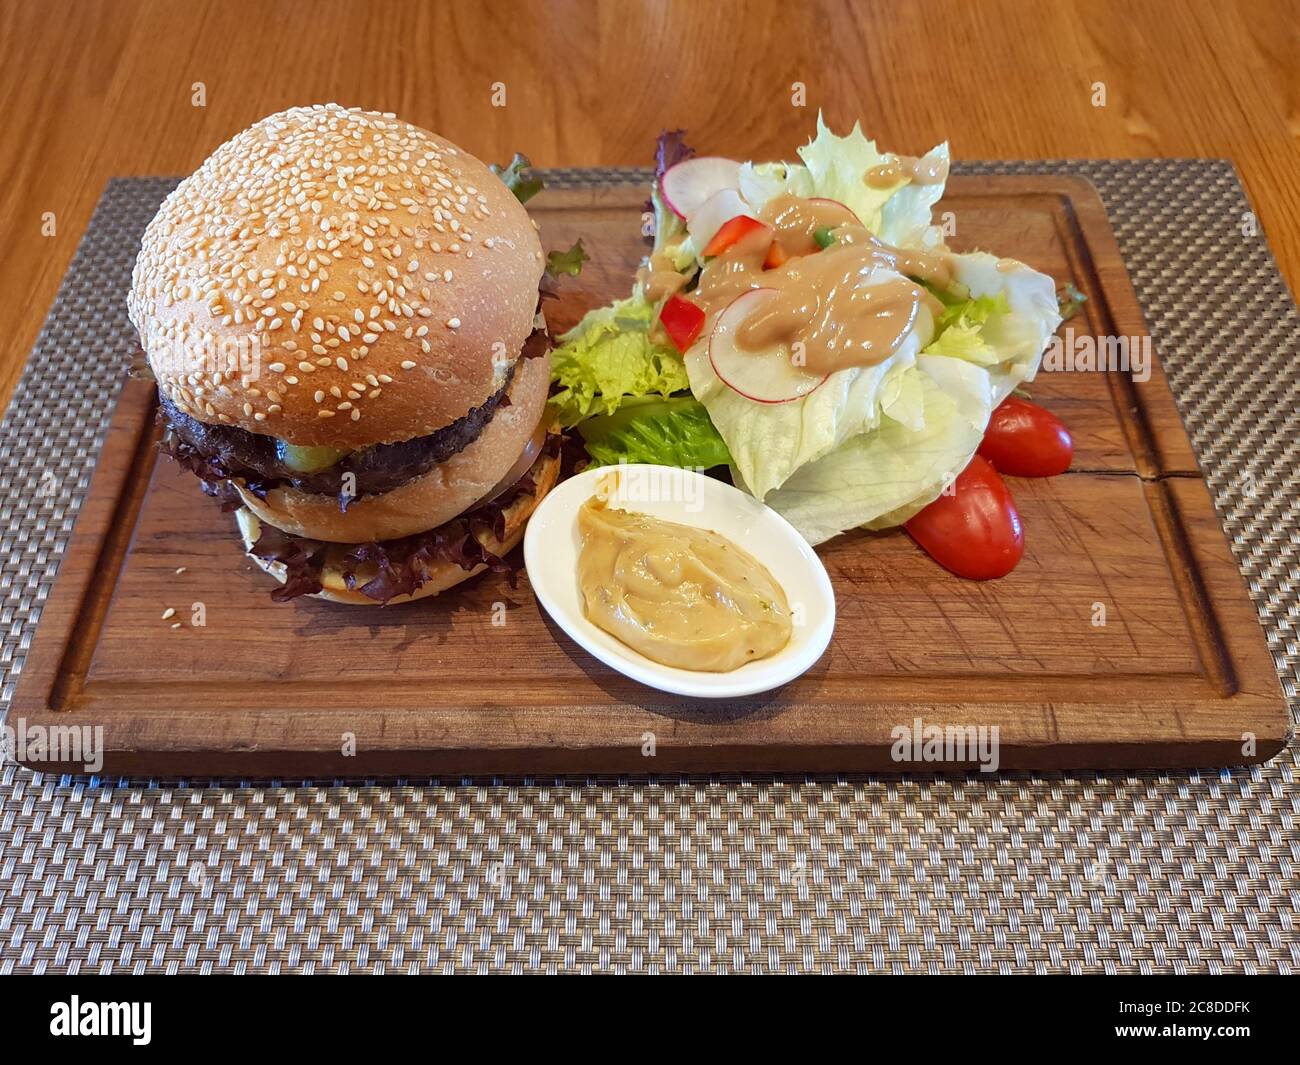 Double Cheeseburger Served On Wooden Plate At Restaurant Stock Photo